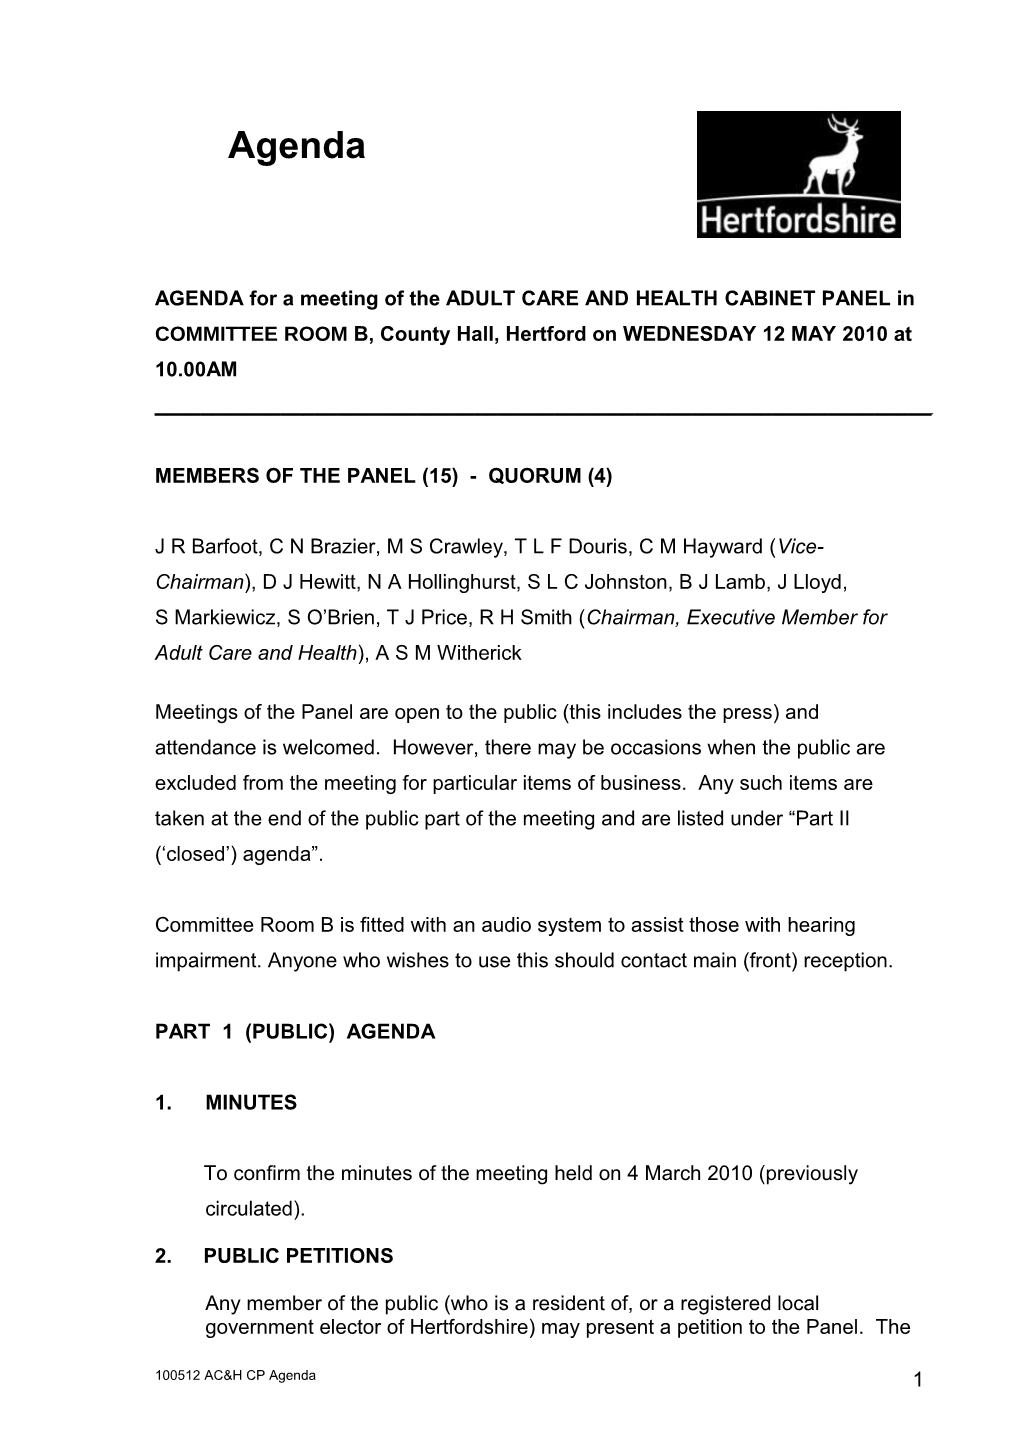 Agenda for a Meeting of the Adult Care and Health Cabinet Panel Wednesday 12 May 2010 at 10.00Am